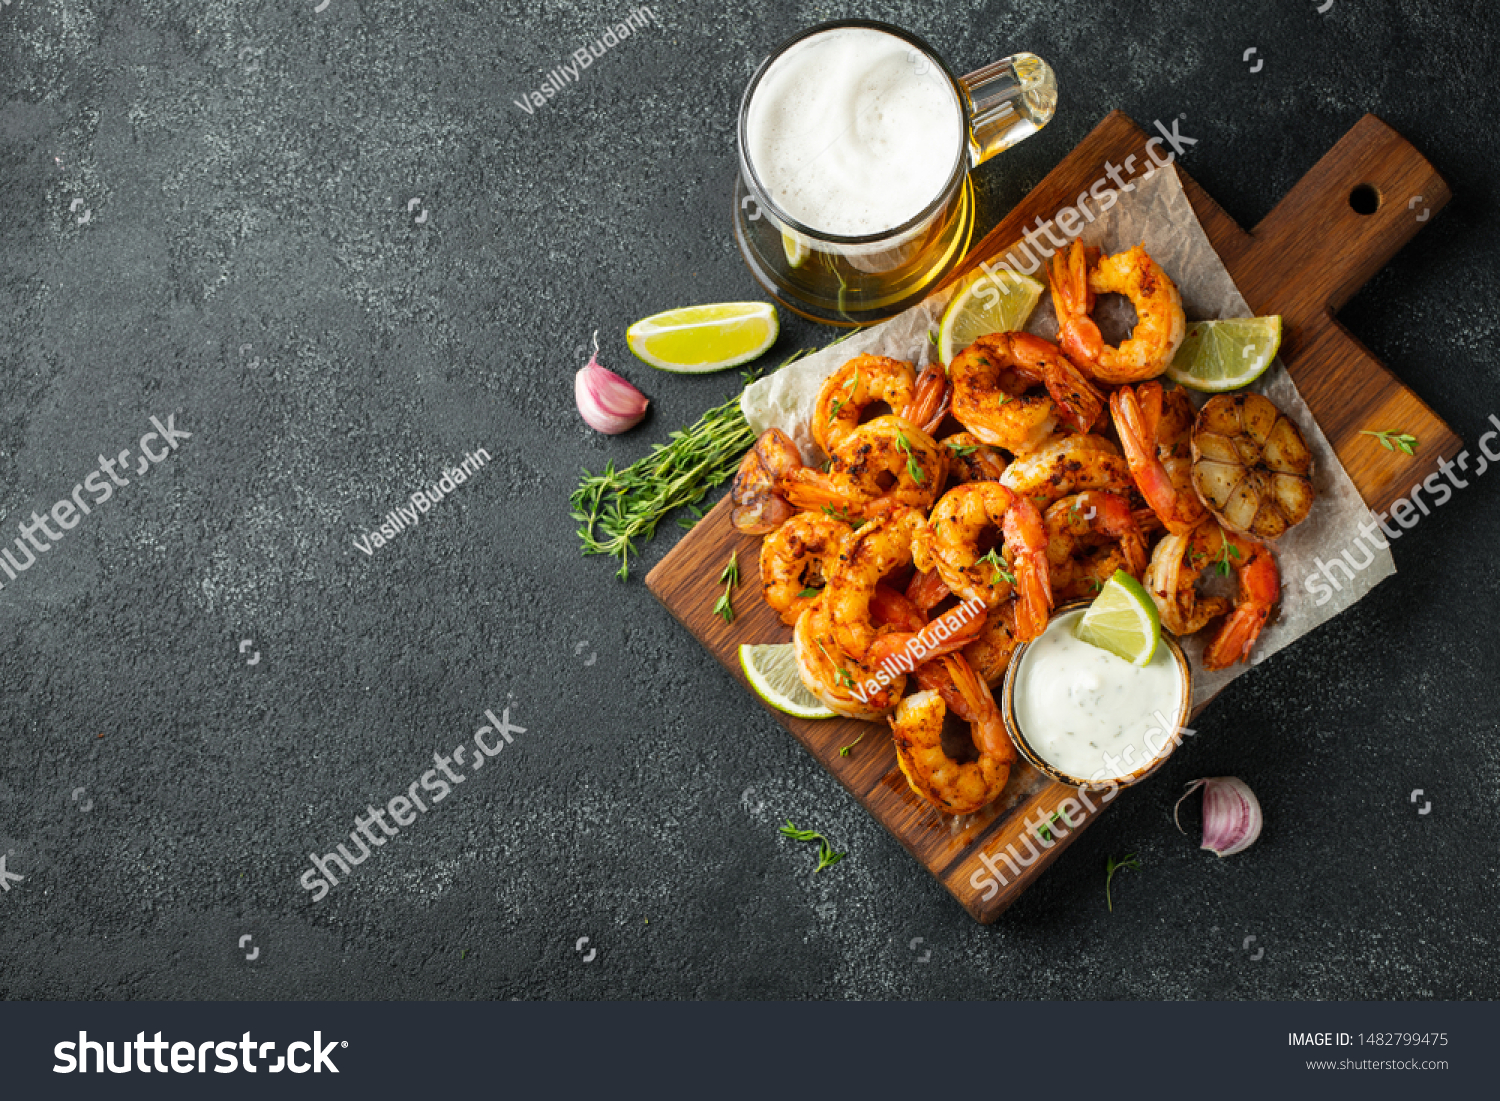 Grilled shrimps or prawns served with lime, garlic and white sauce on a dark concrete background. Seafood. Top view with copy space. Flat lay #1482799475